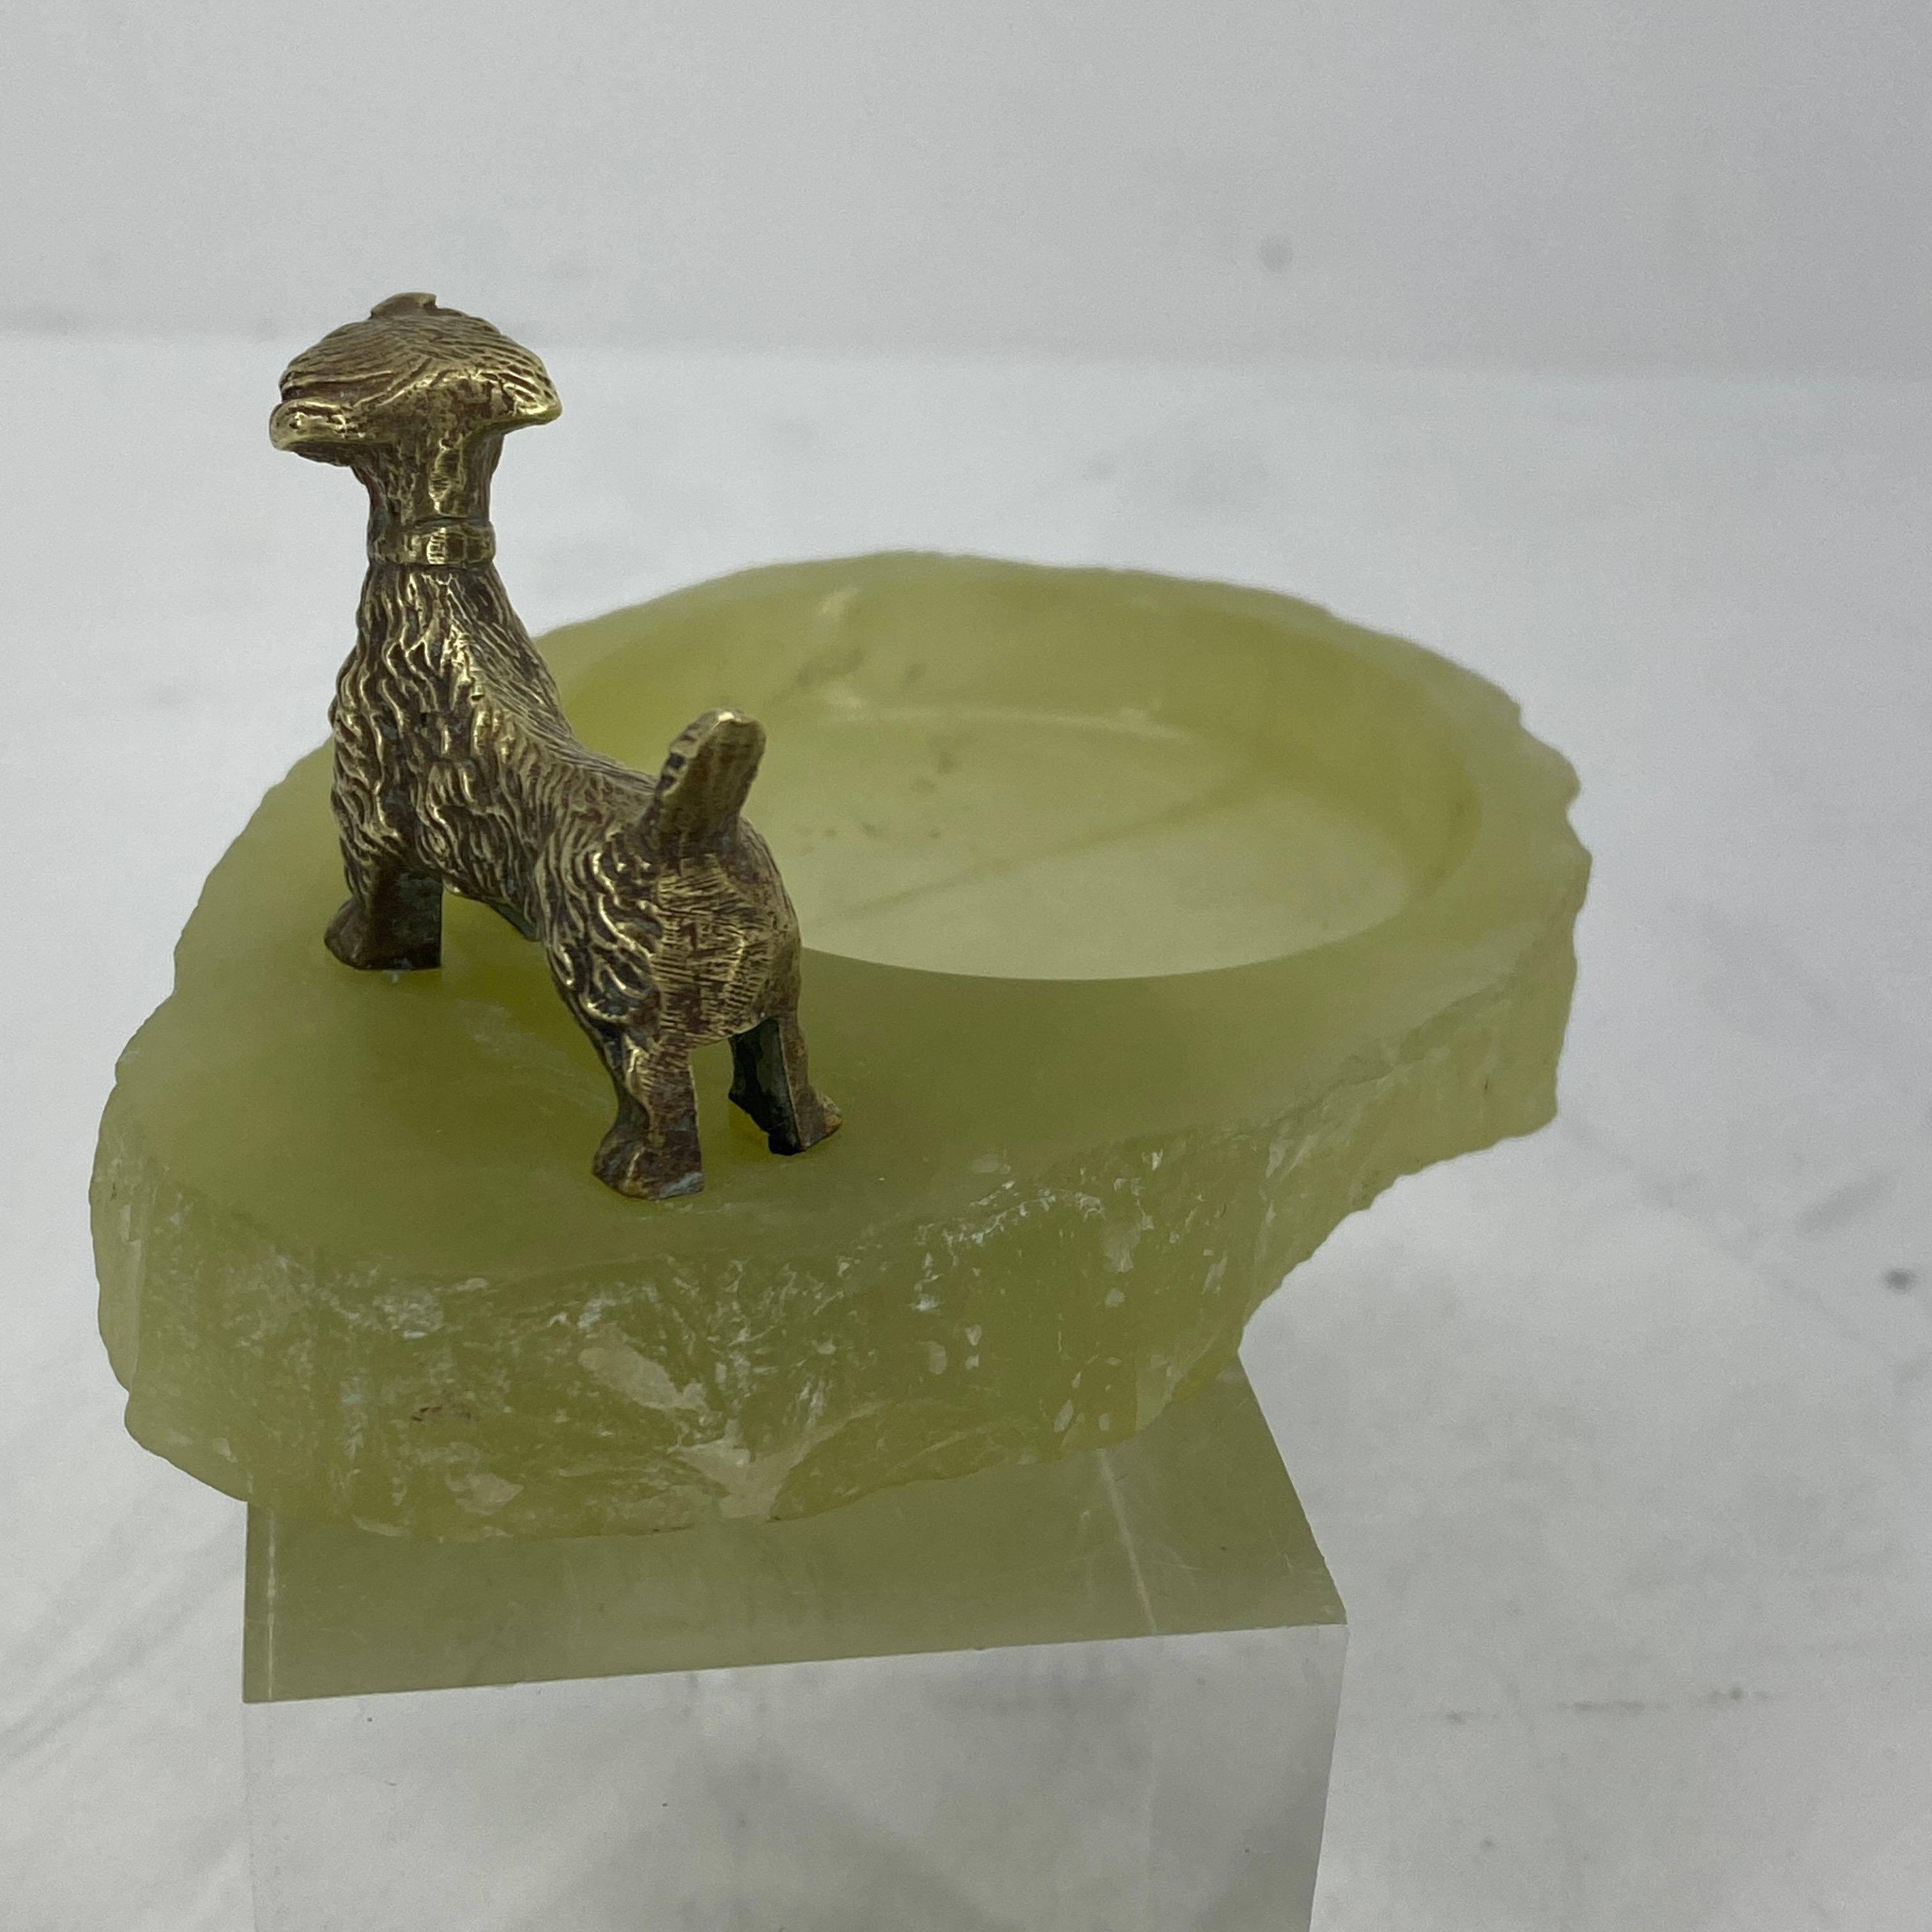 Pistachio Green Onyx and Bronze Terrier Ashtray or Jewelry Tray 4